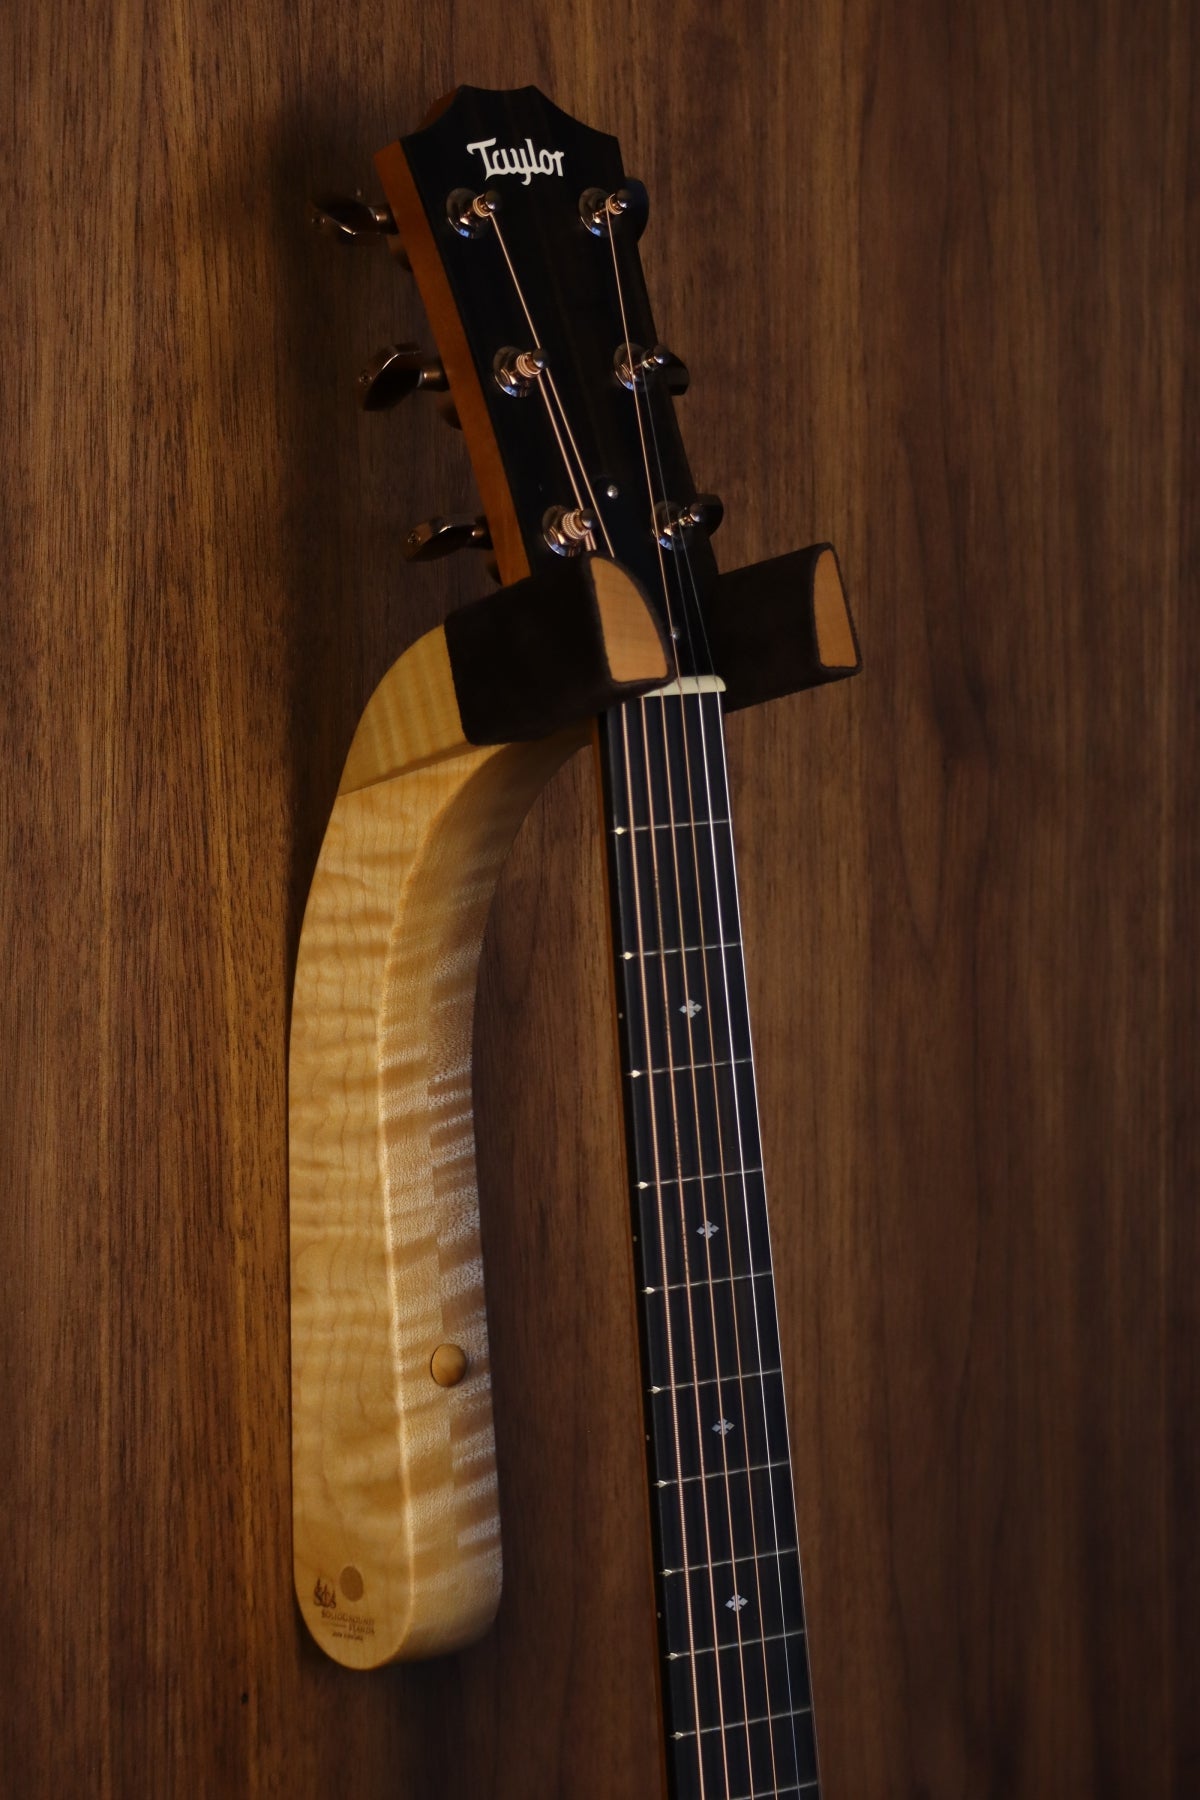 Curly maple wood guitar wall mount hanger installed on paneled wall with Taylor guitar